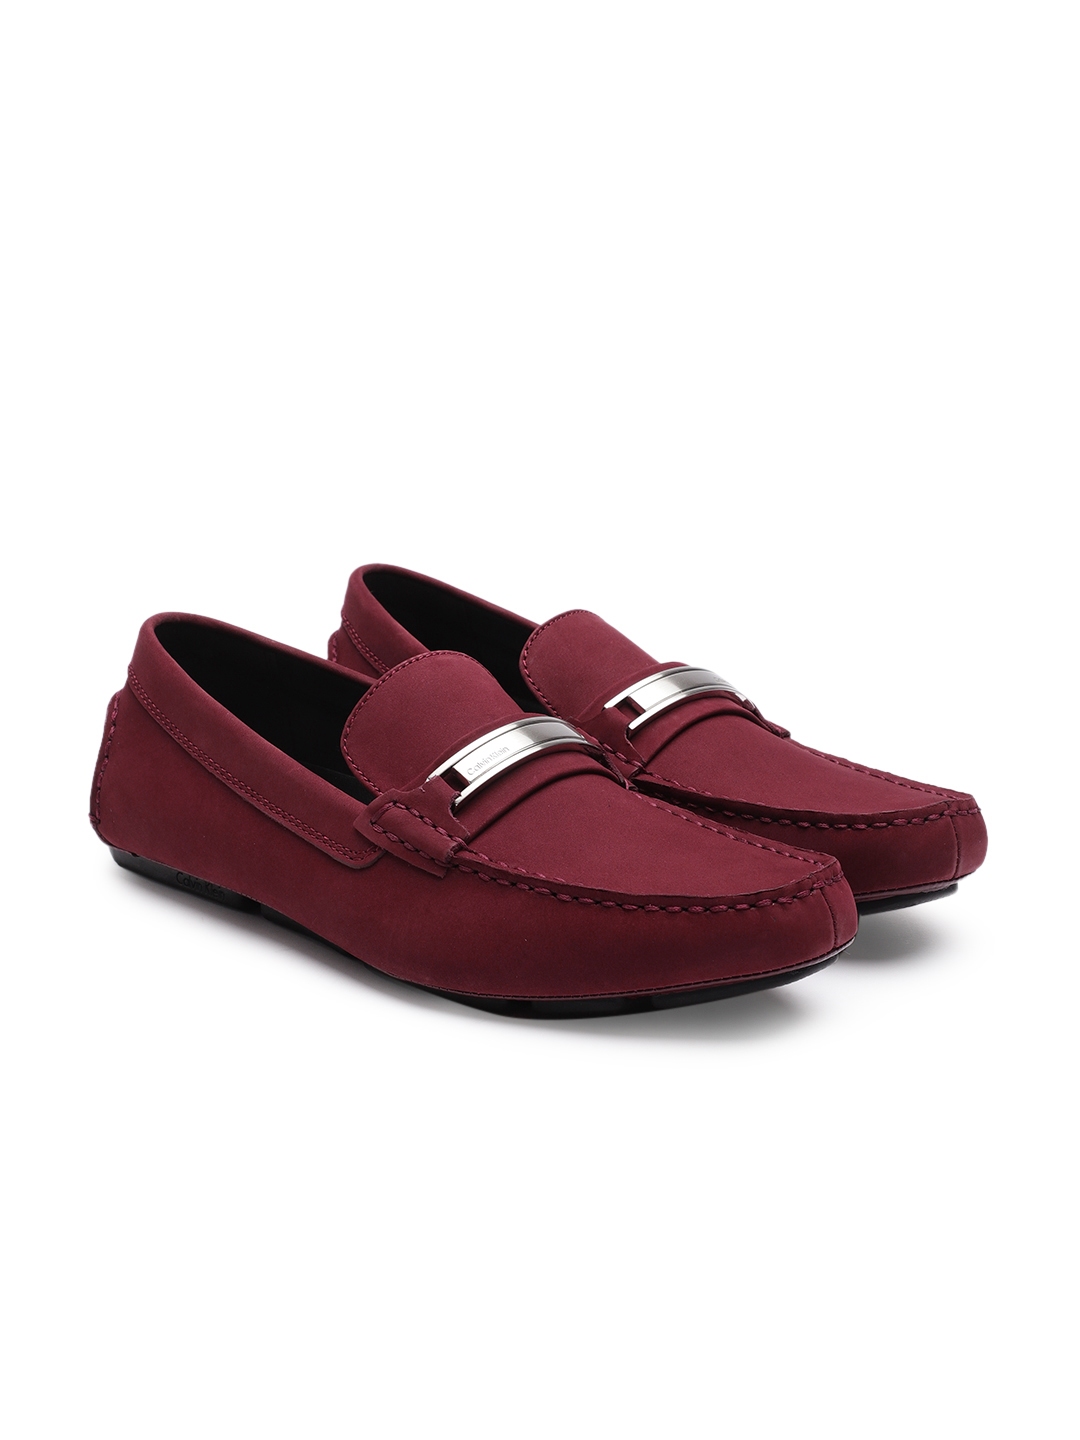 calvin klein red loafers